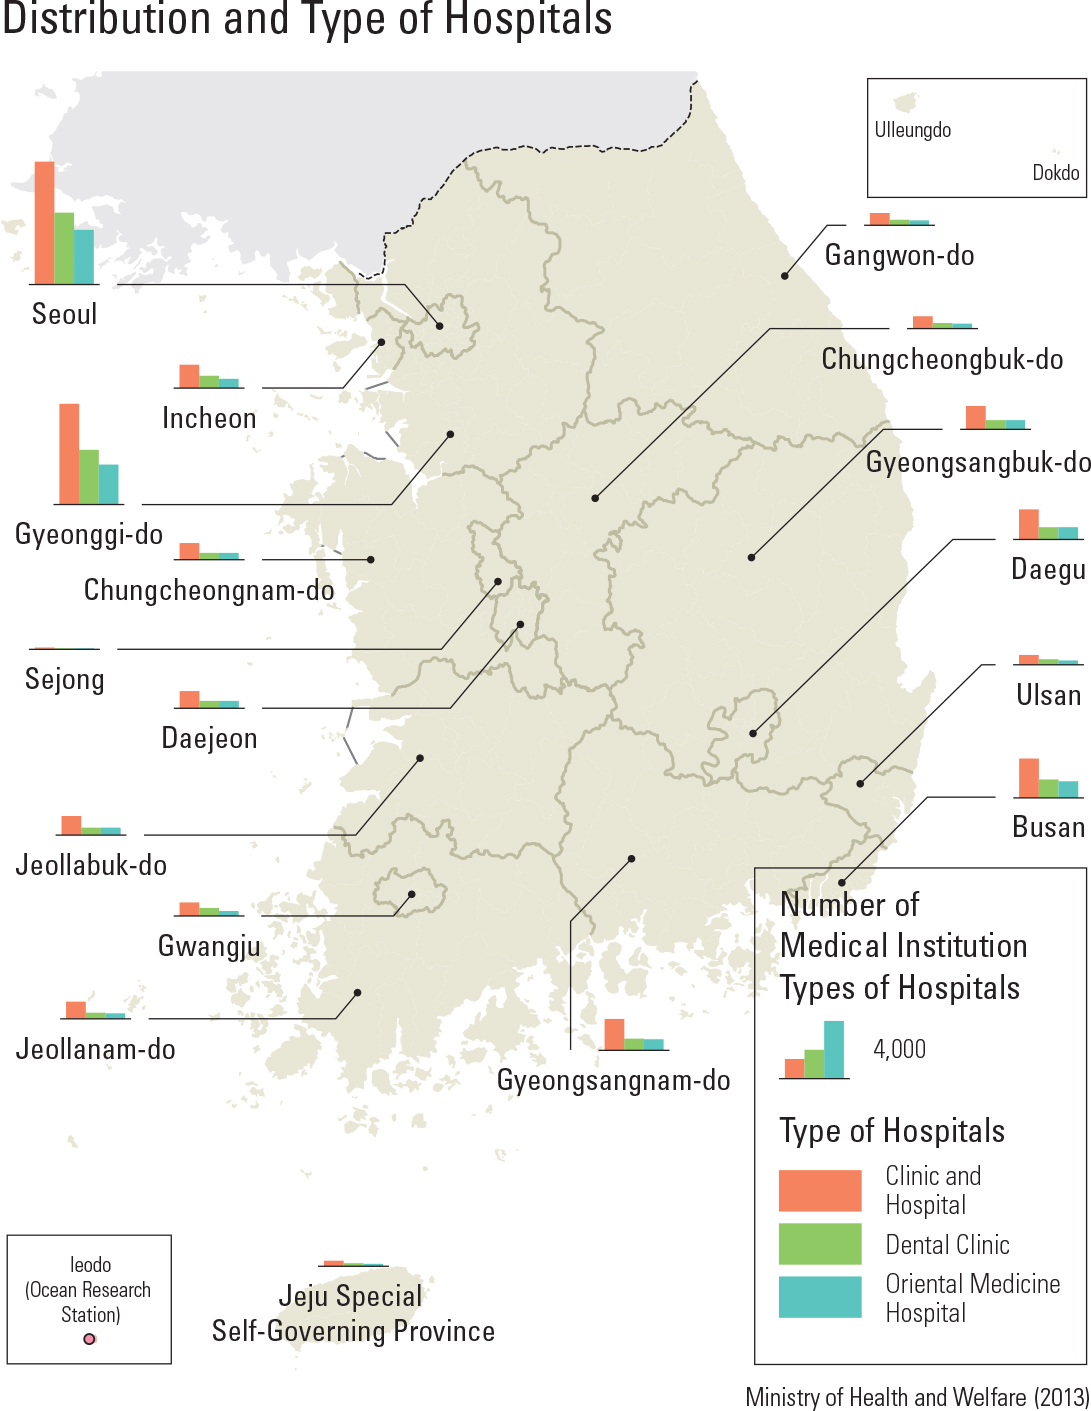  Distribution and Type of Hospitals